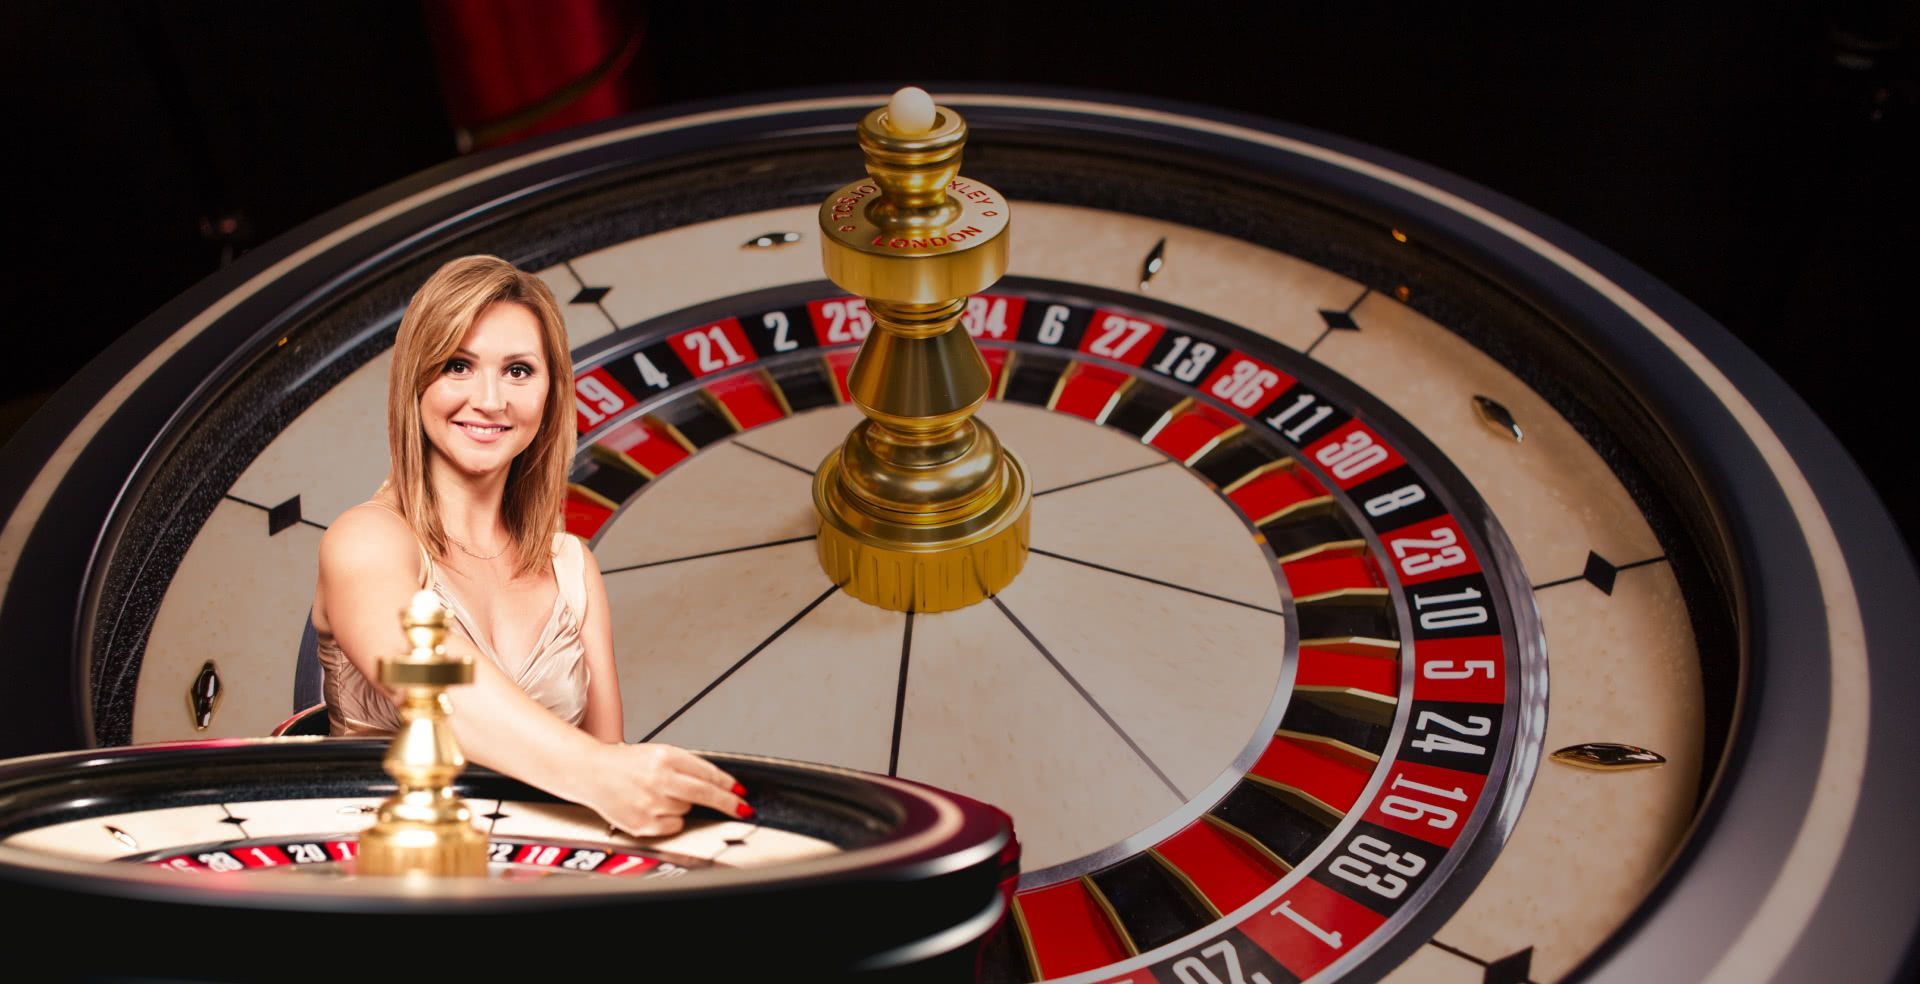 Roulette for Real Money